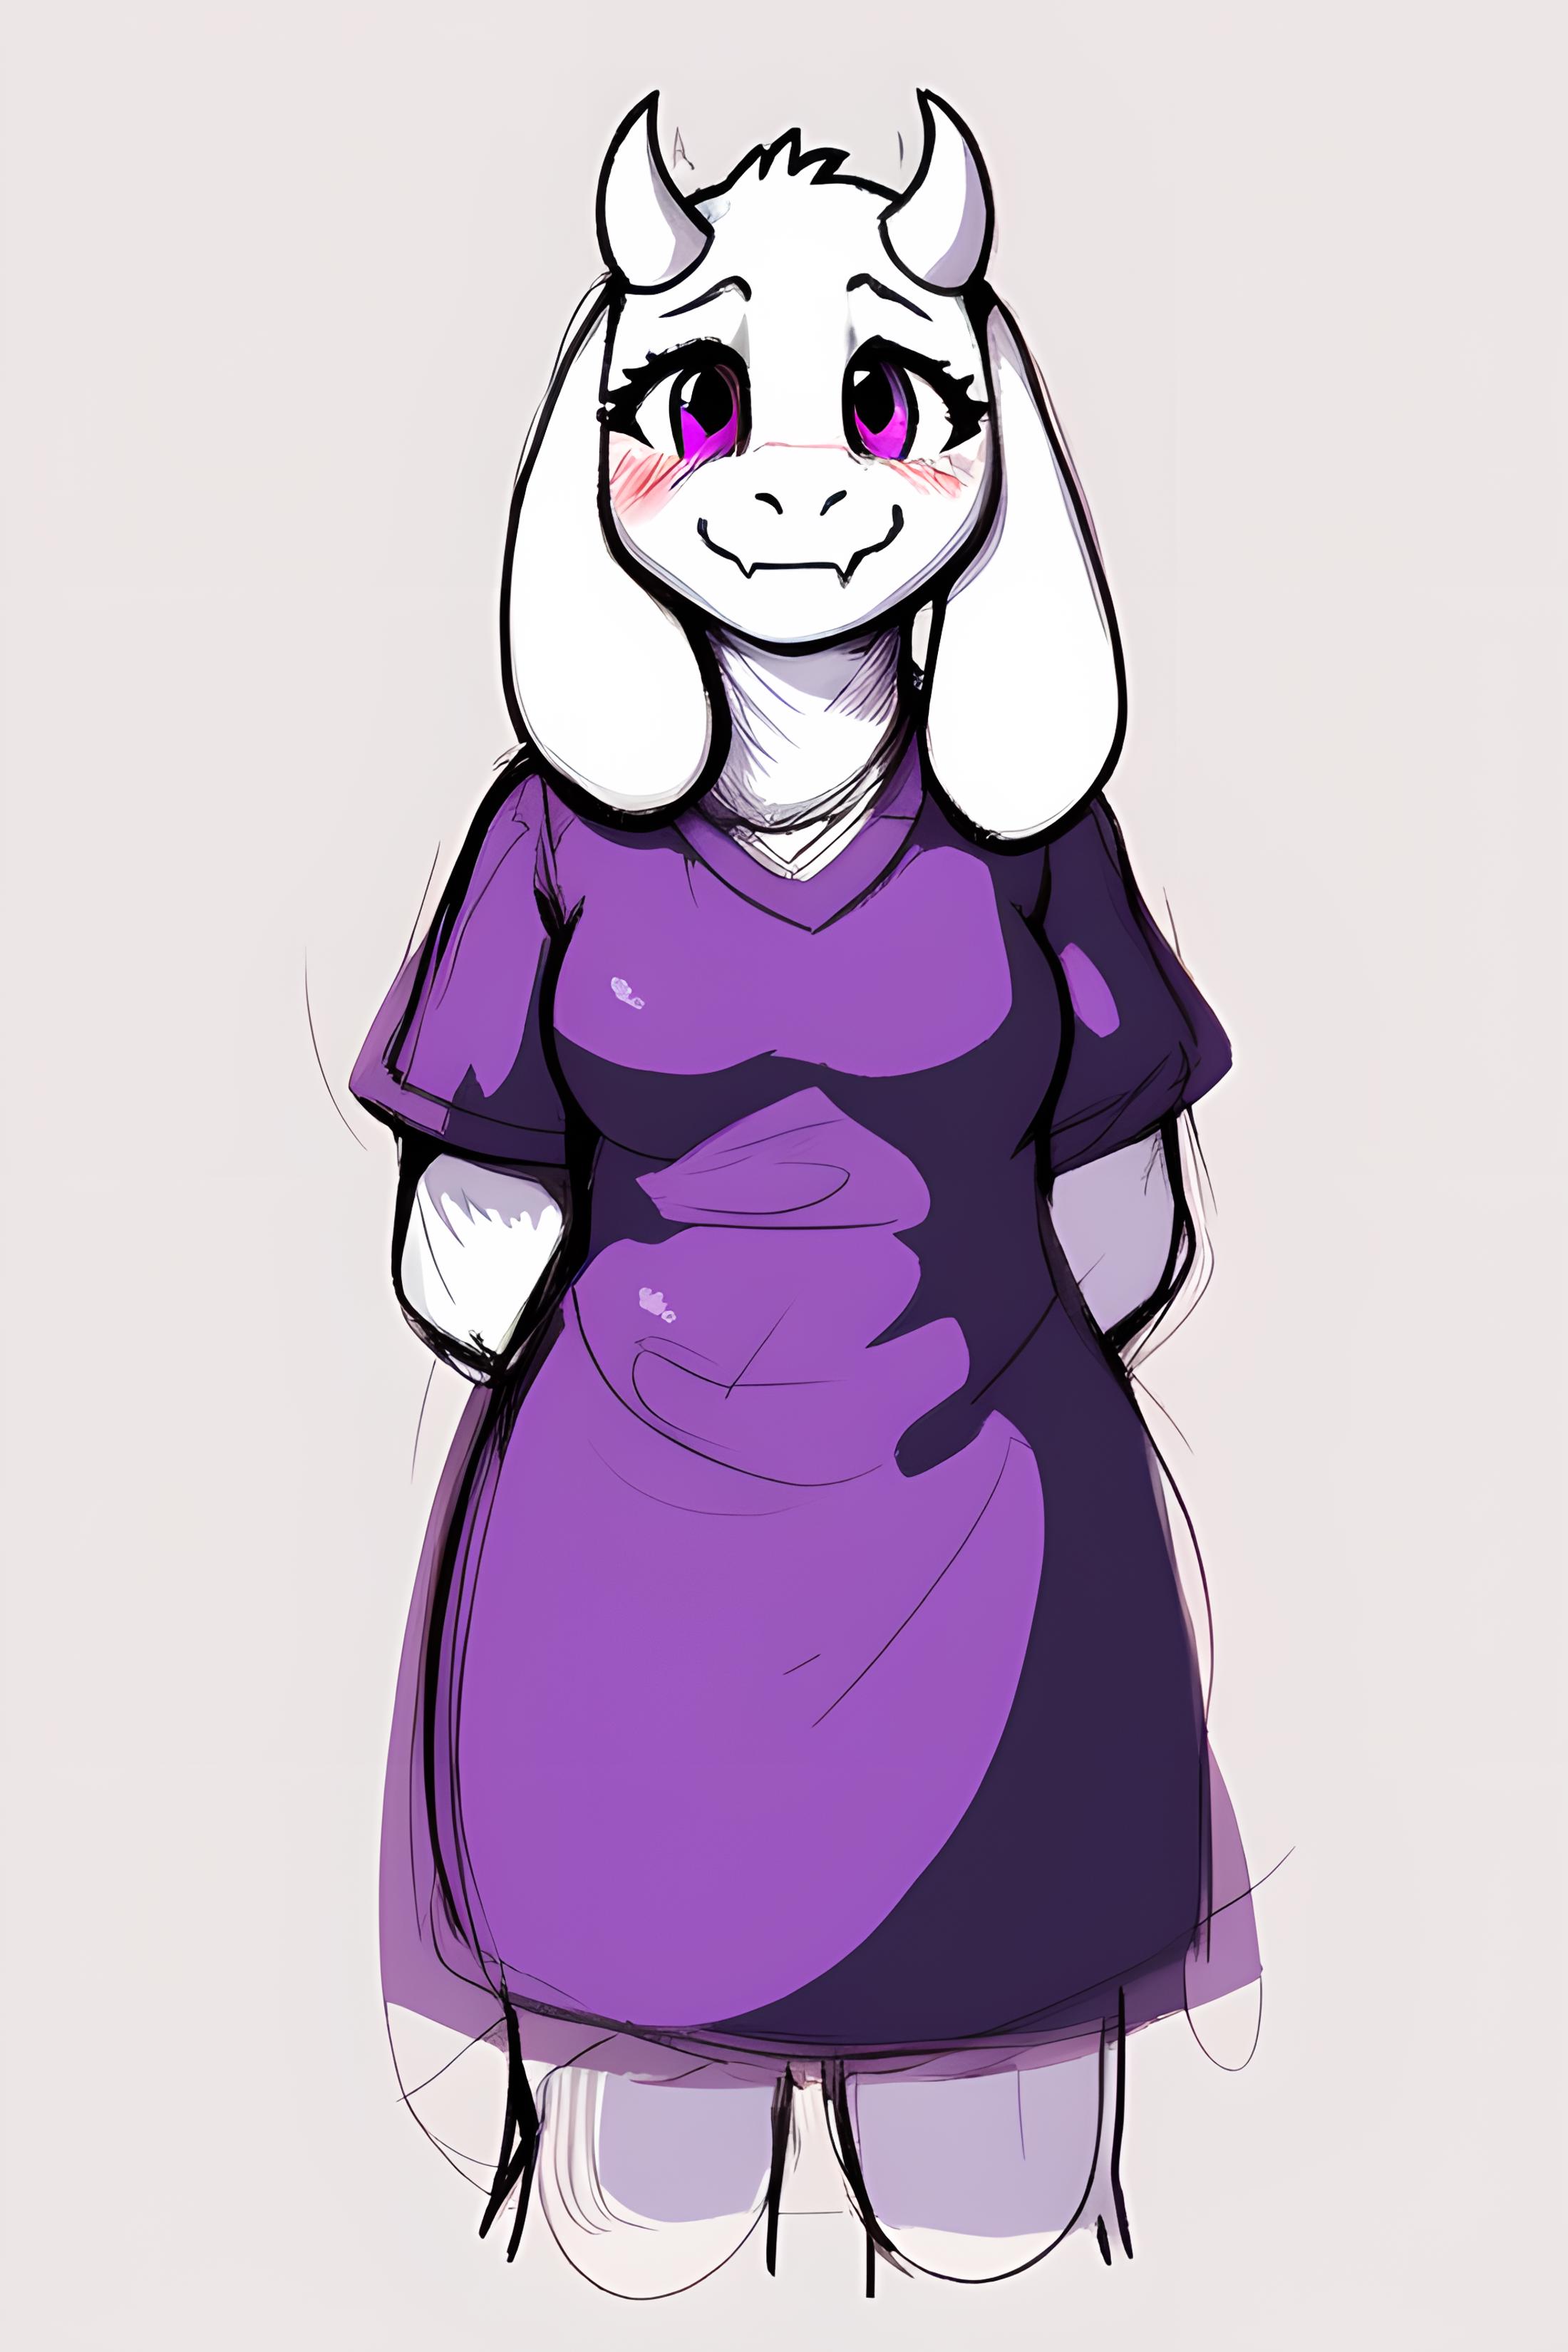 Toriel image by MacDiddy